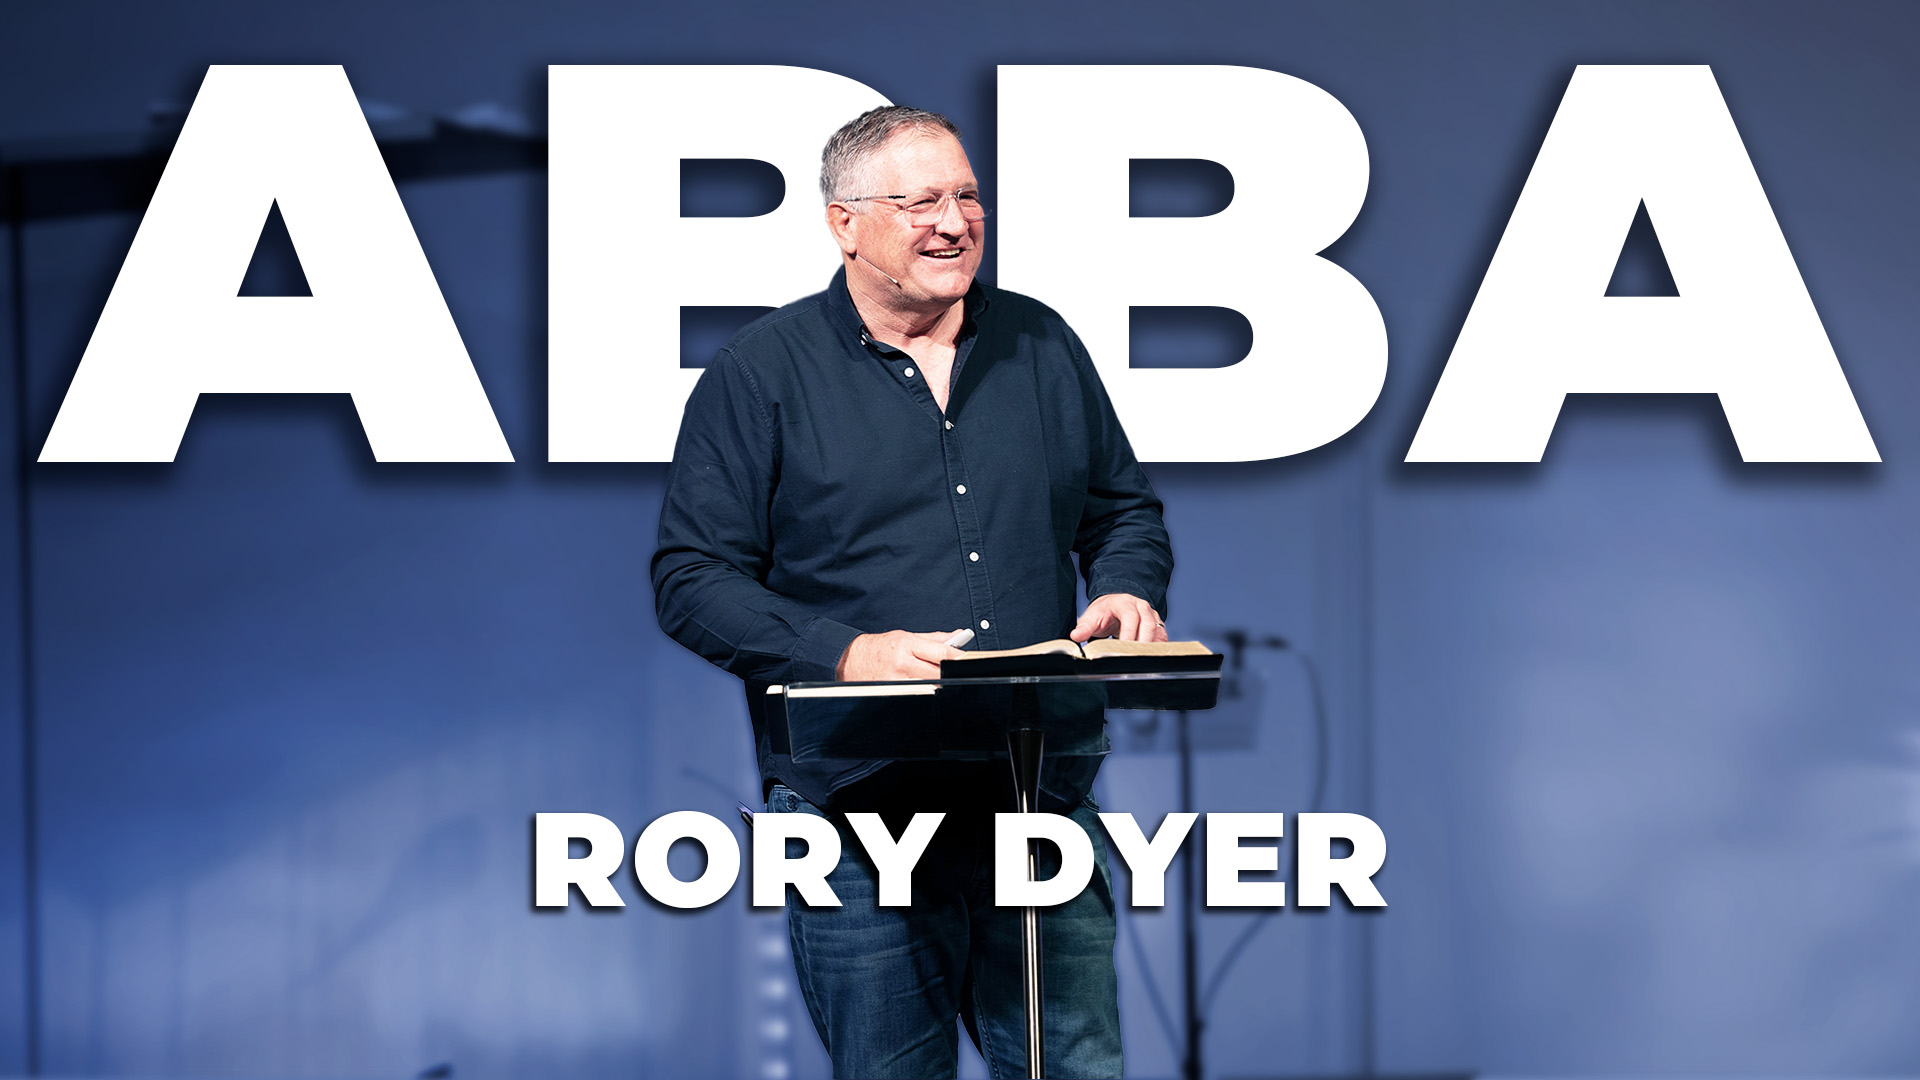 How Much More? // Rory Dyer // ABBA 614 Conference Sunday